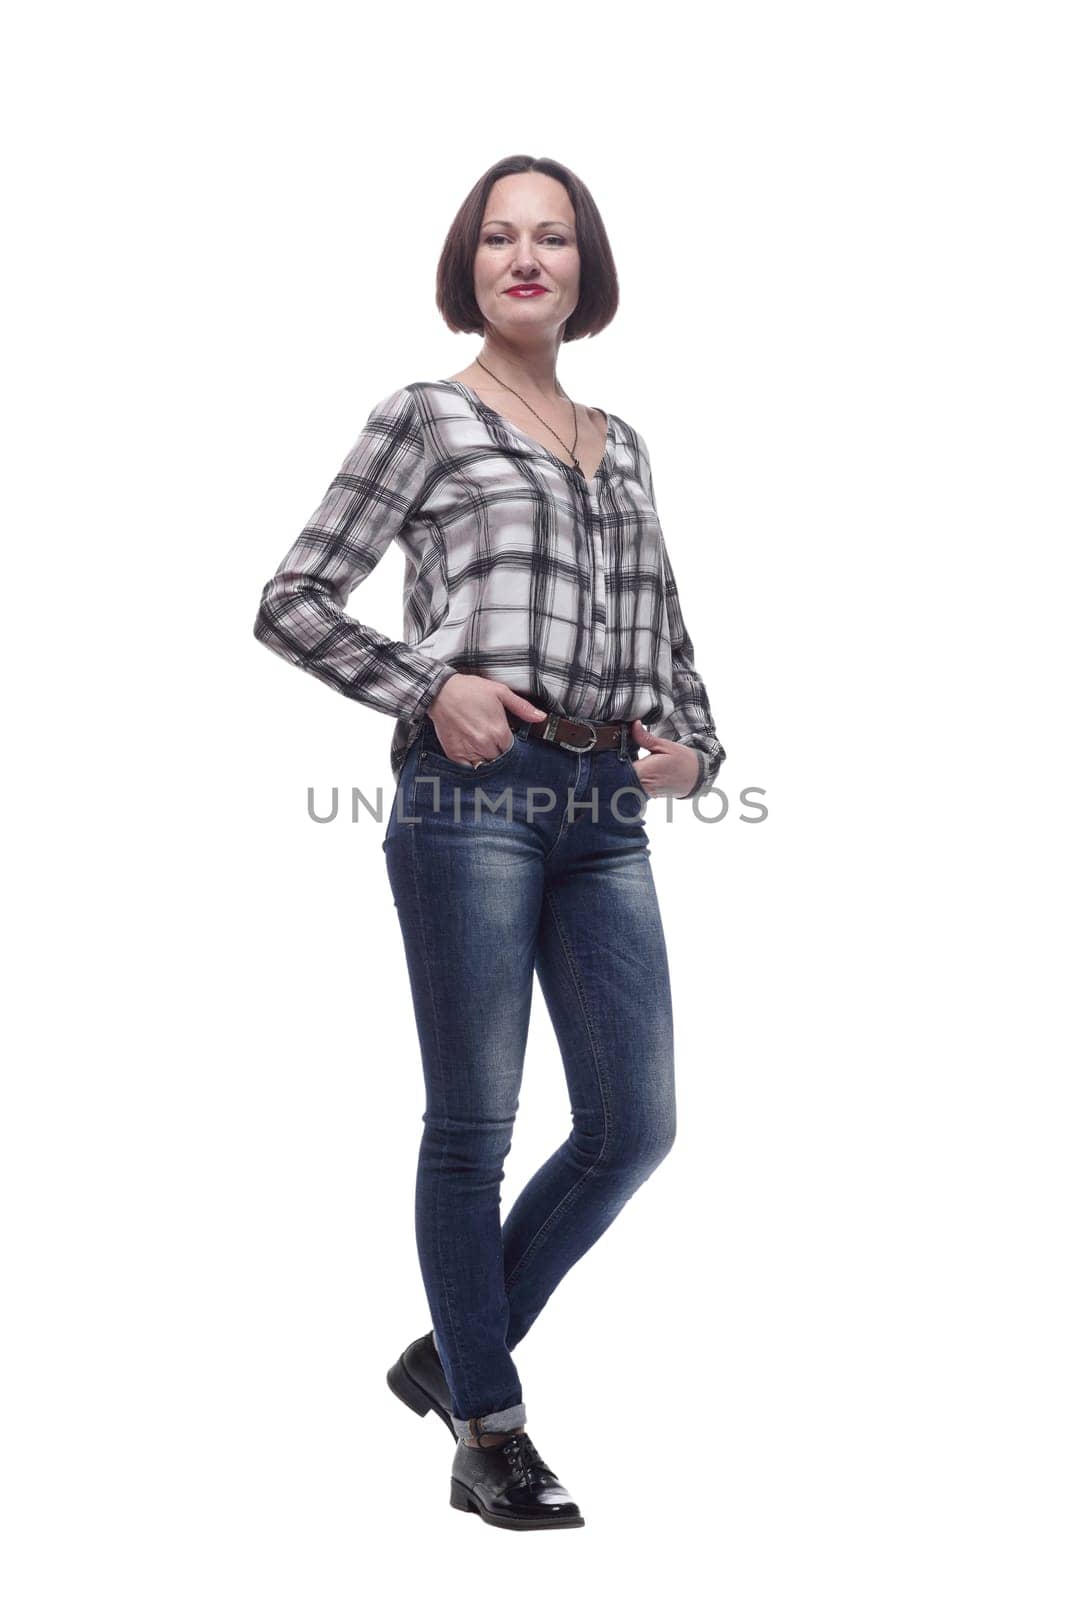 in full growth. attractive woman in jeans and a checked shirt . isolated on a white background.